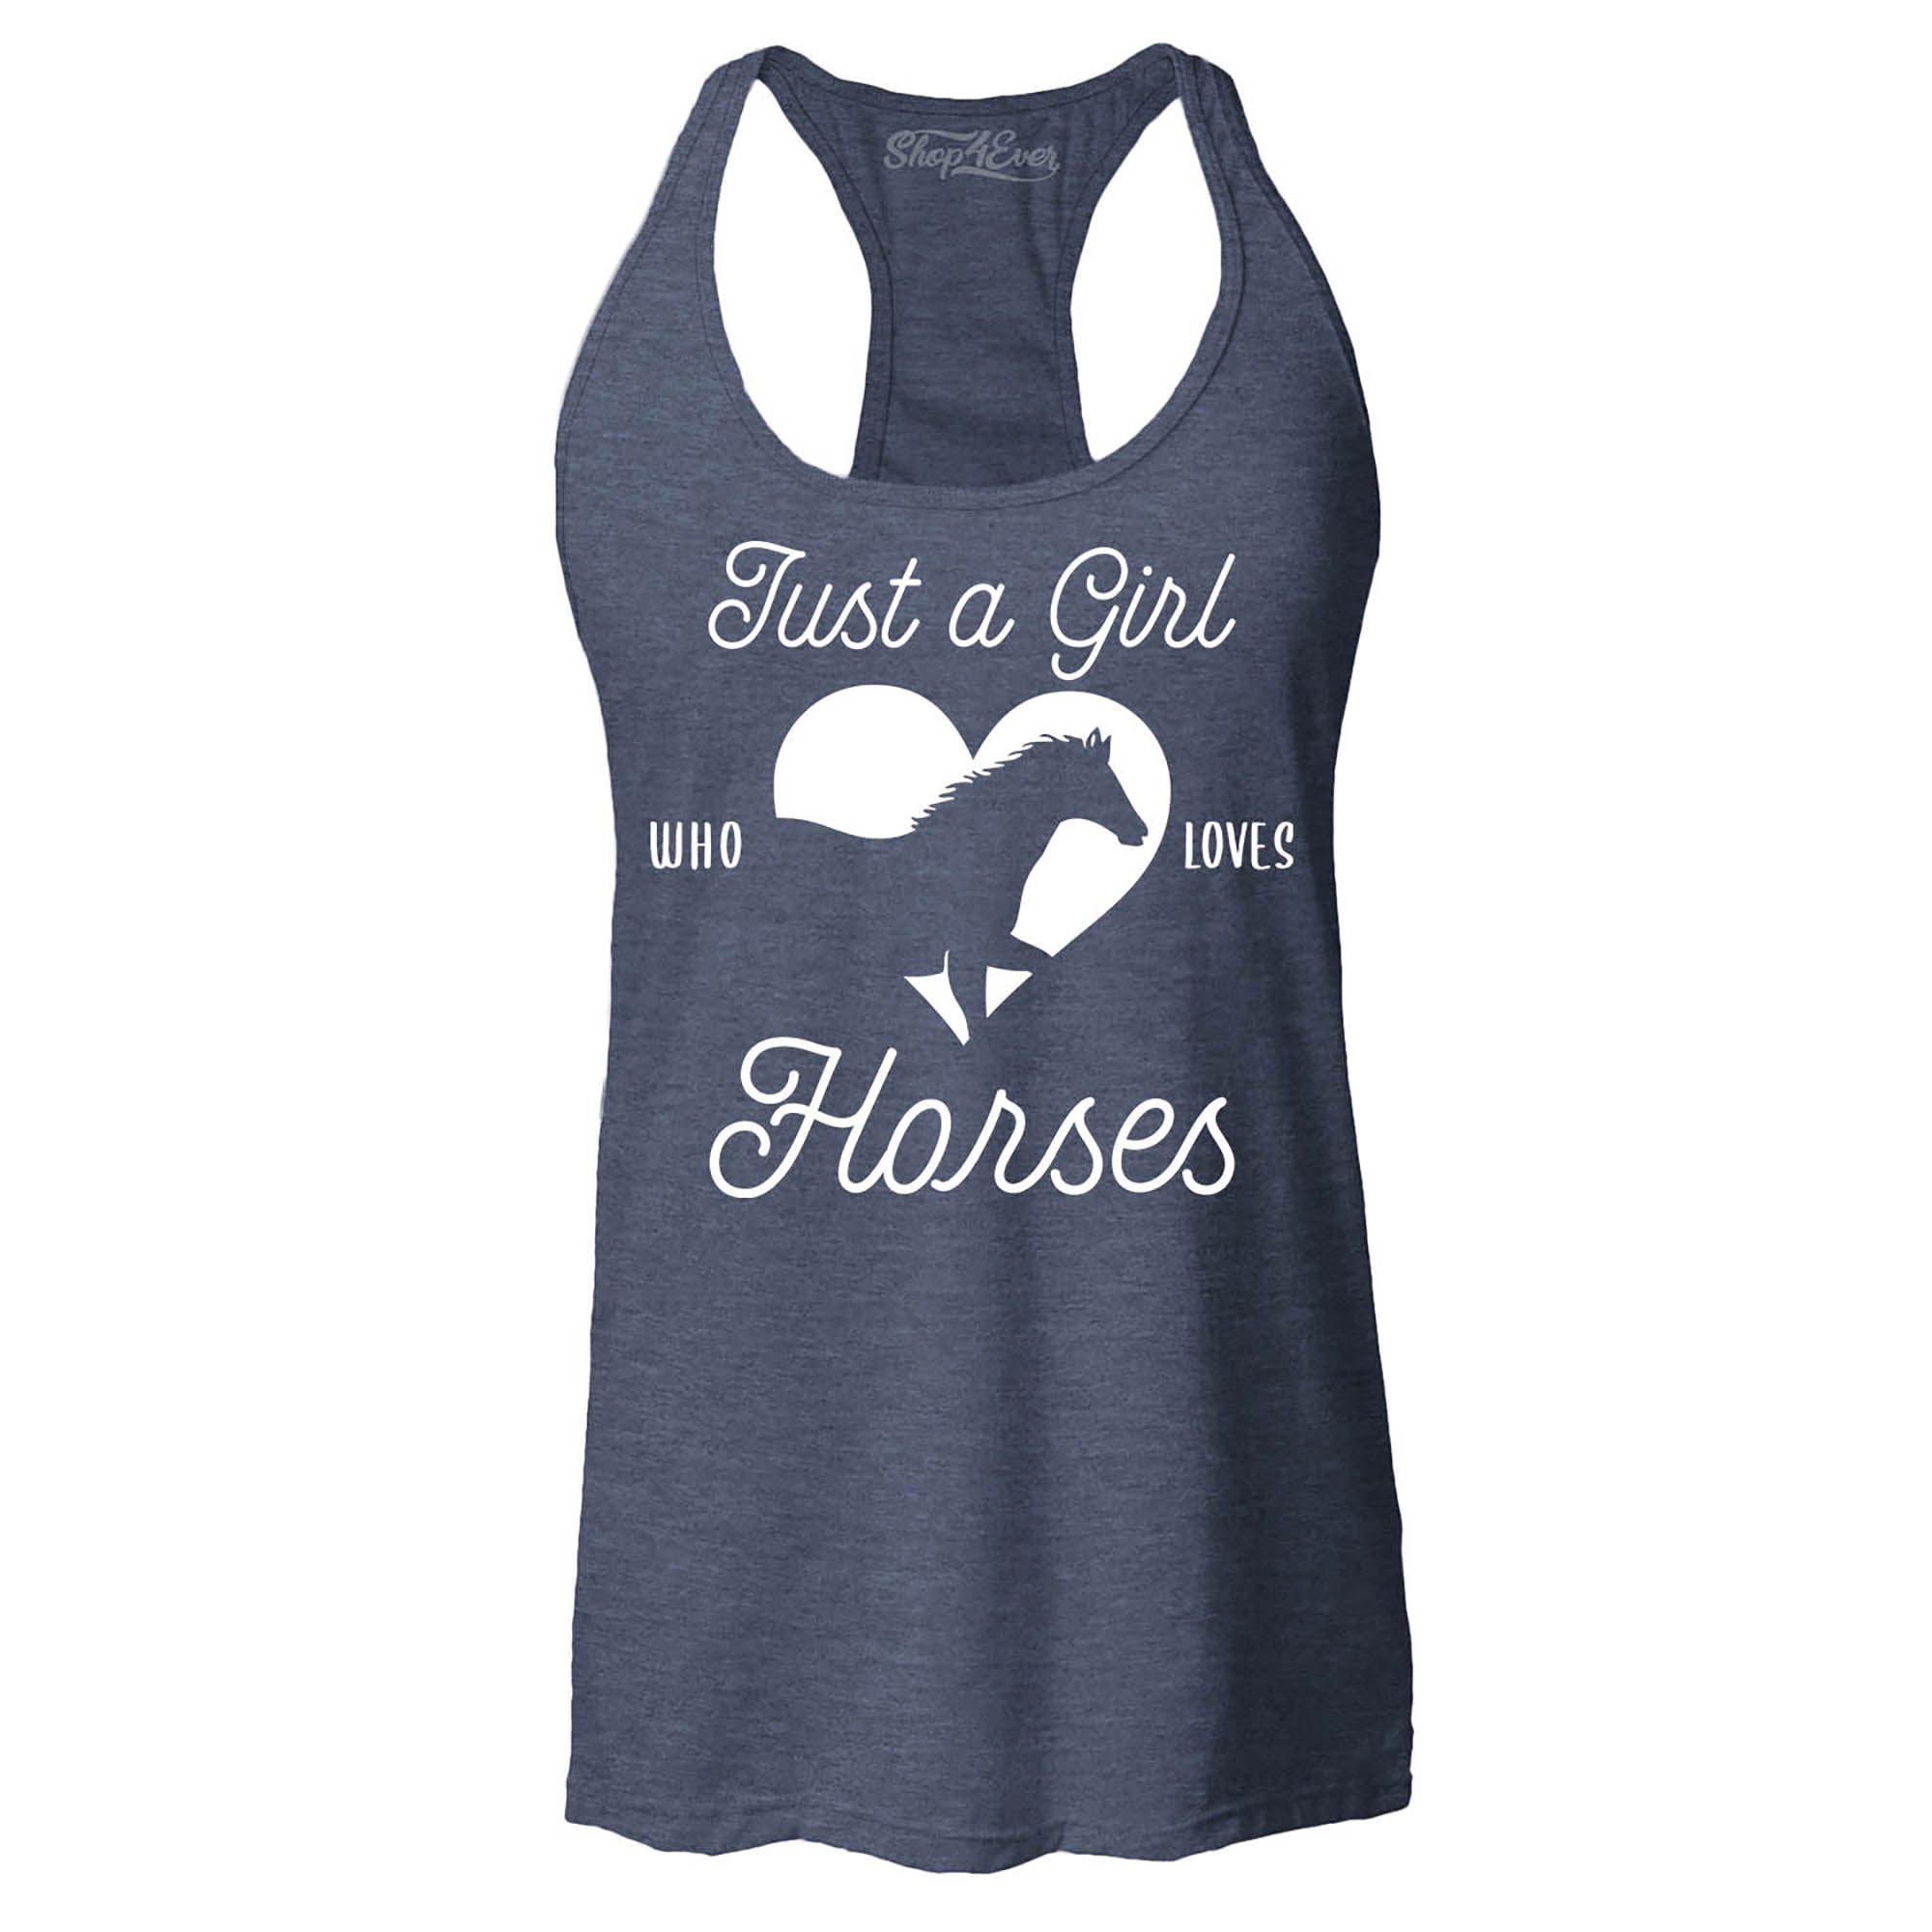 Just A Girl Who Loves Horses Women's Racerback Tank Top Slim Fit